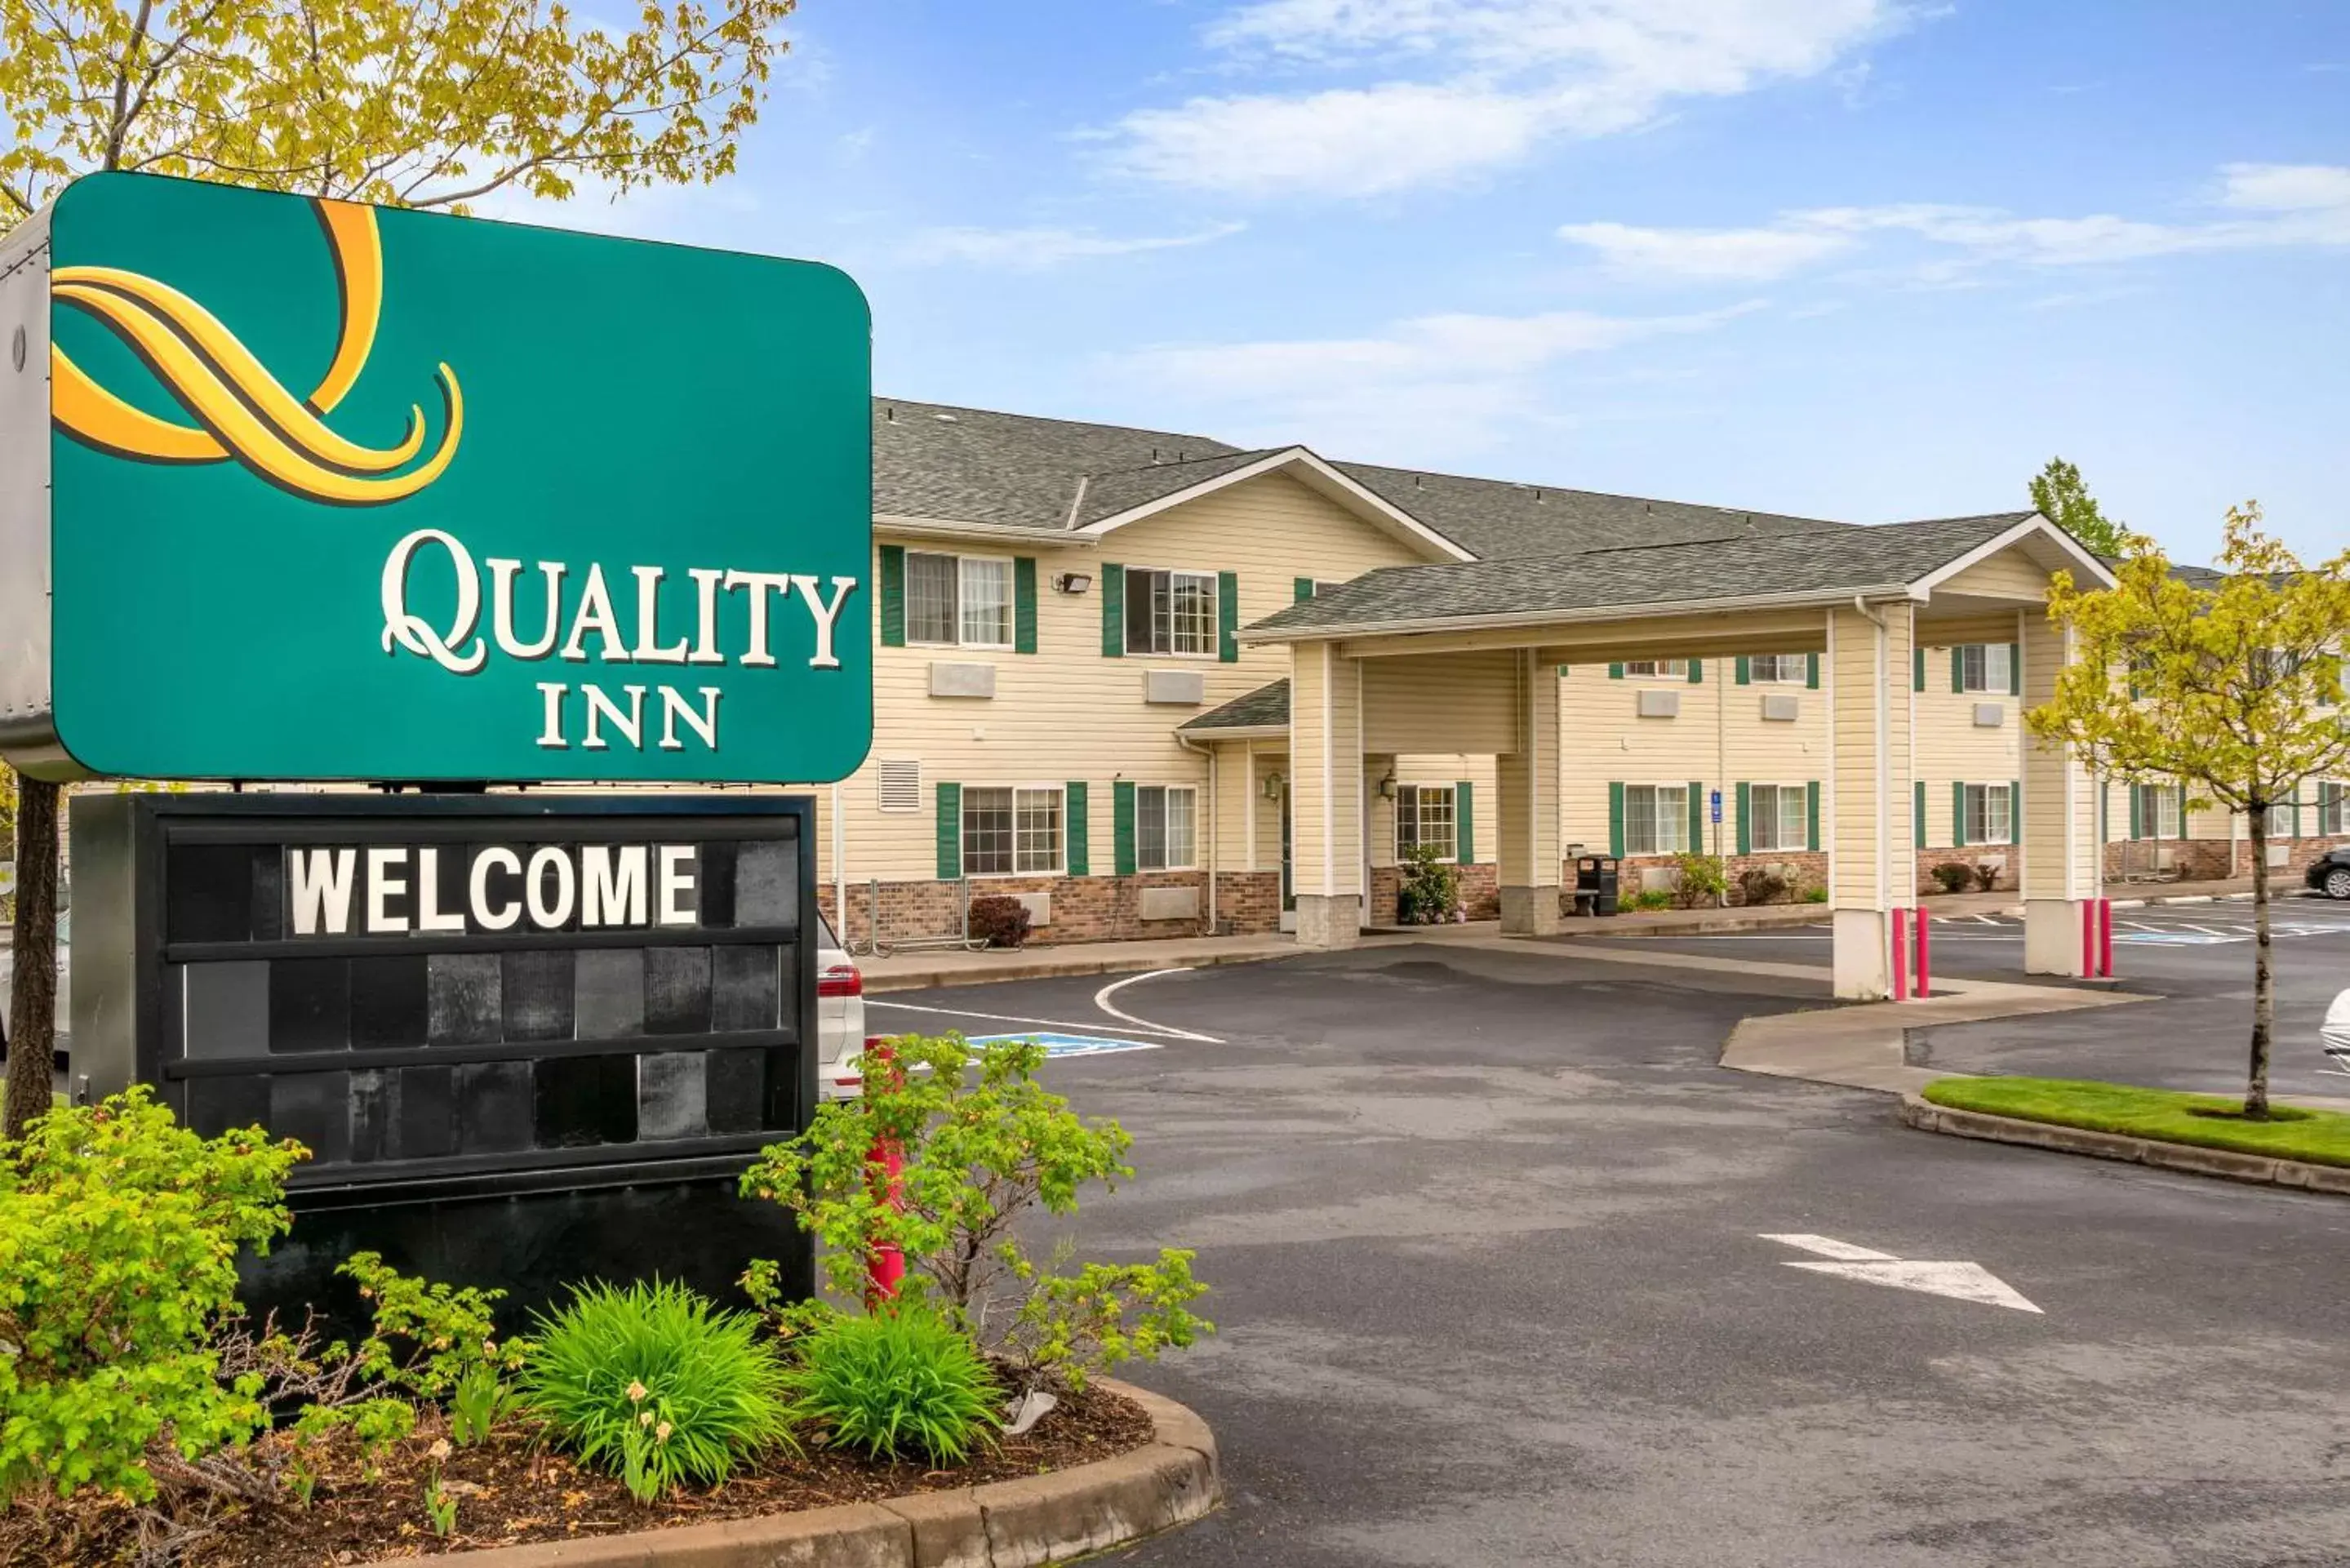 Property Building in Bend Quality Inn